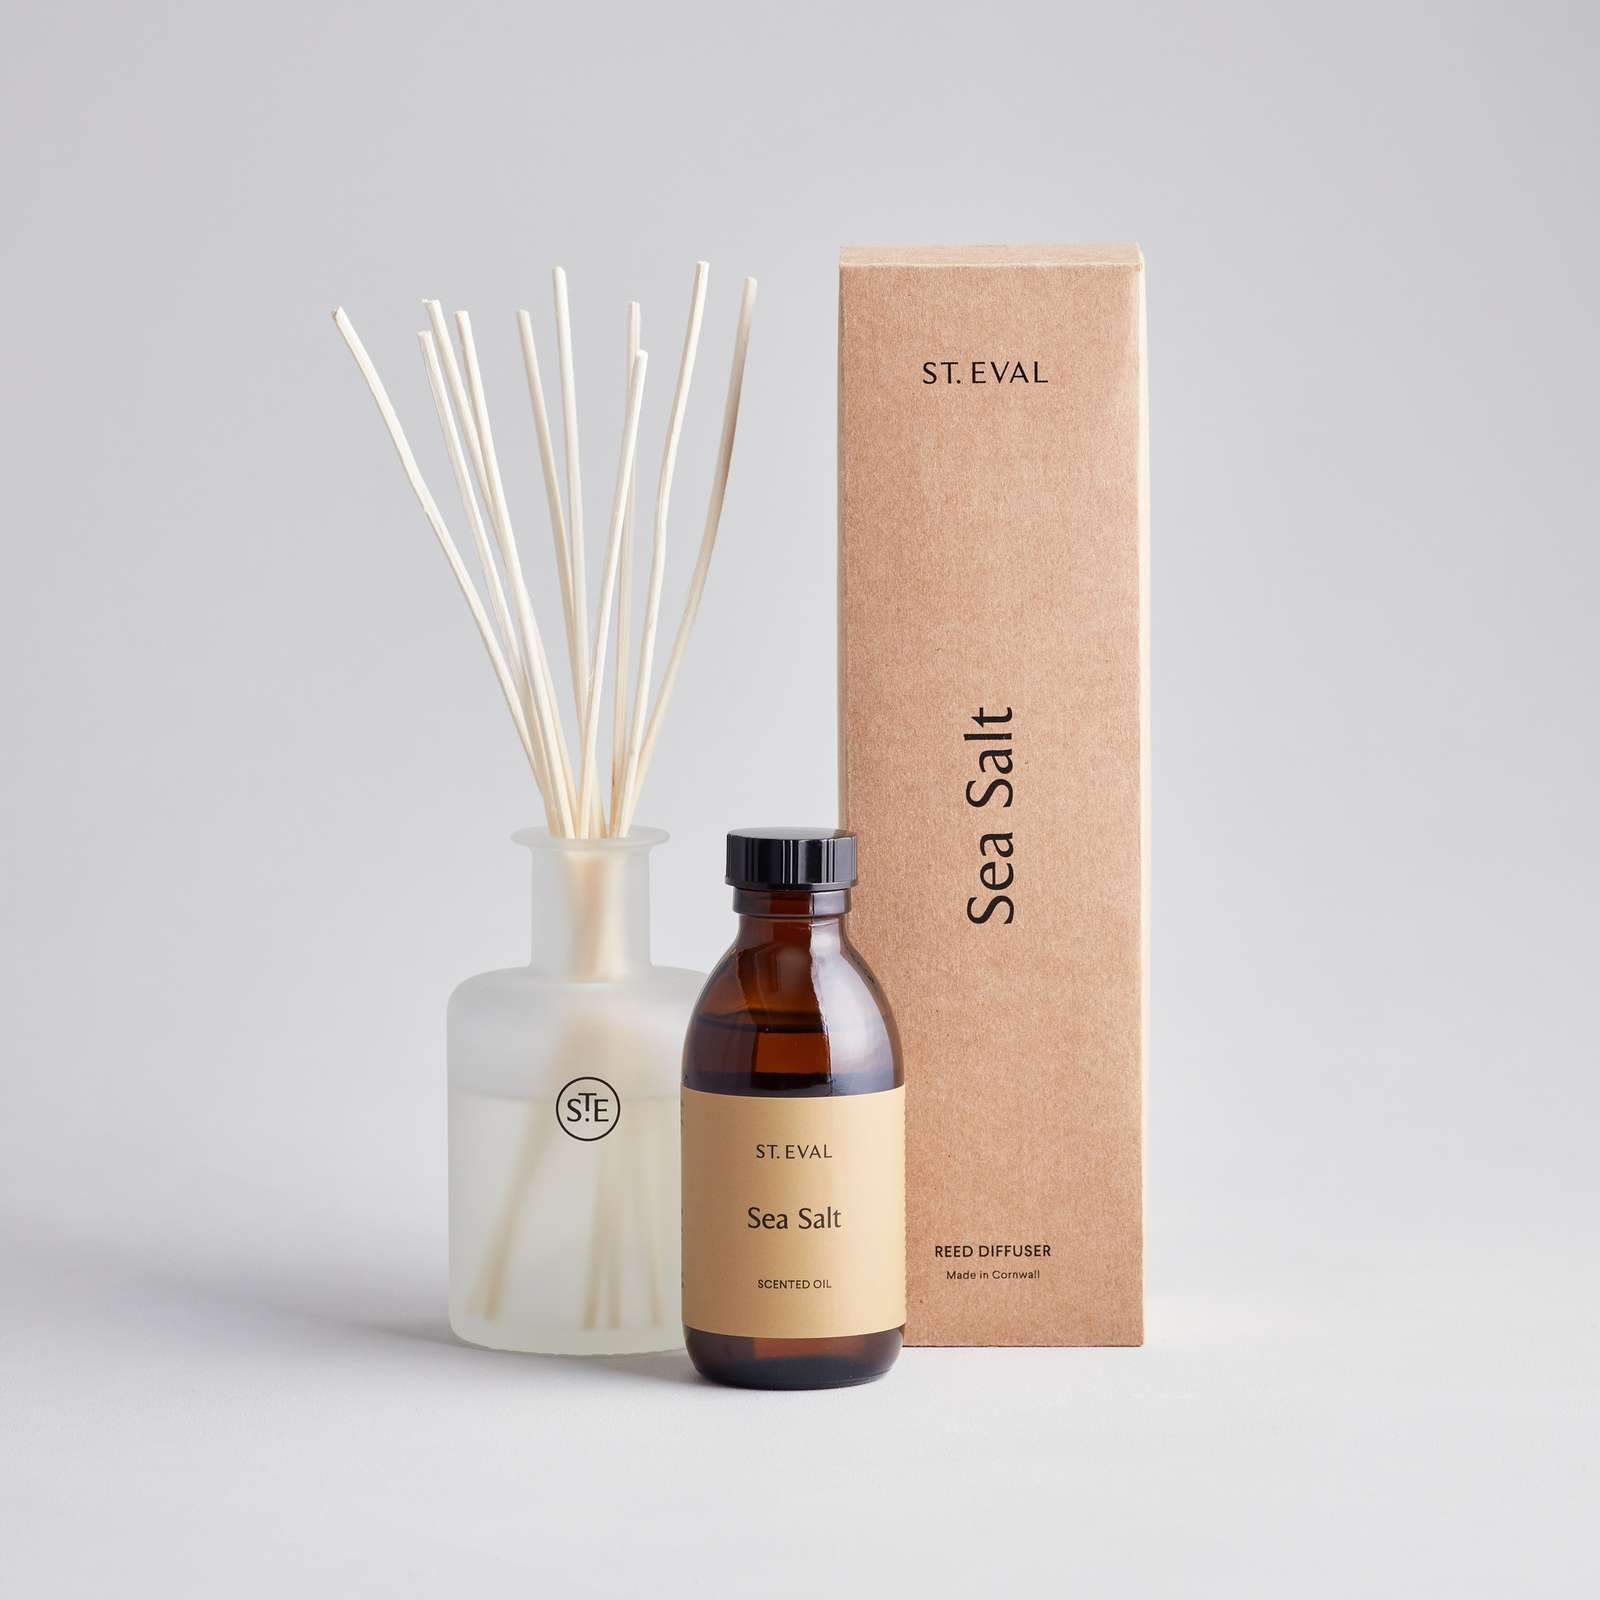 Sea Salt Reed Diffuser | St. Eval – St. Eval Candle Company